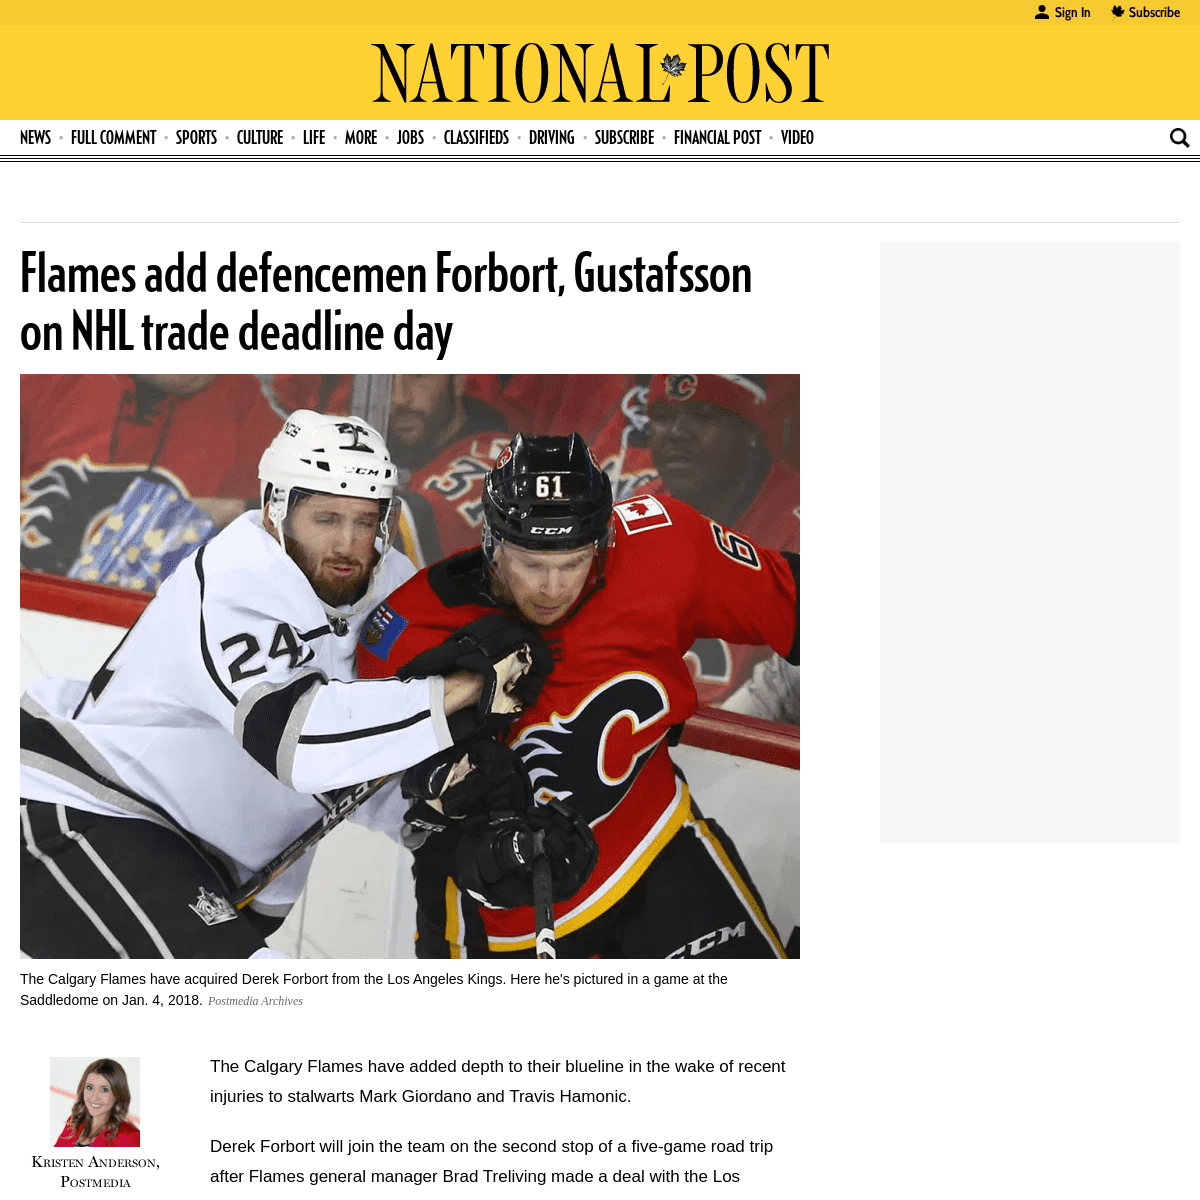 A complete backup of nationalpost.com/sports/hockey/nhl/calgary-flames/flames-add-defencemen-gustafsson-forbort-on-nhl-trade-dea